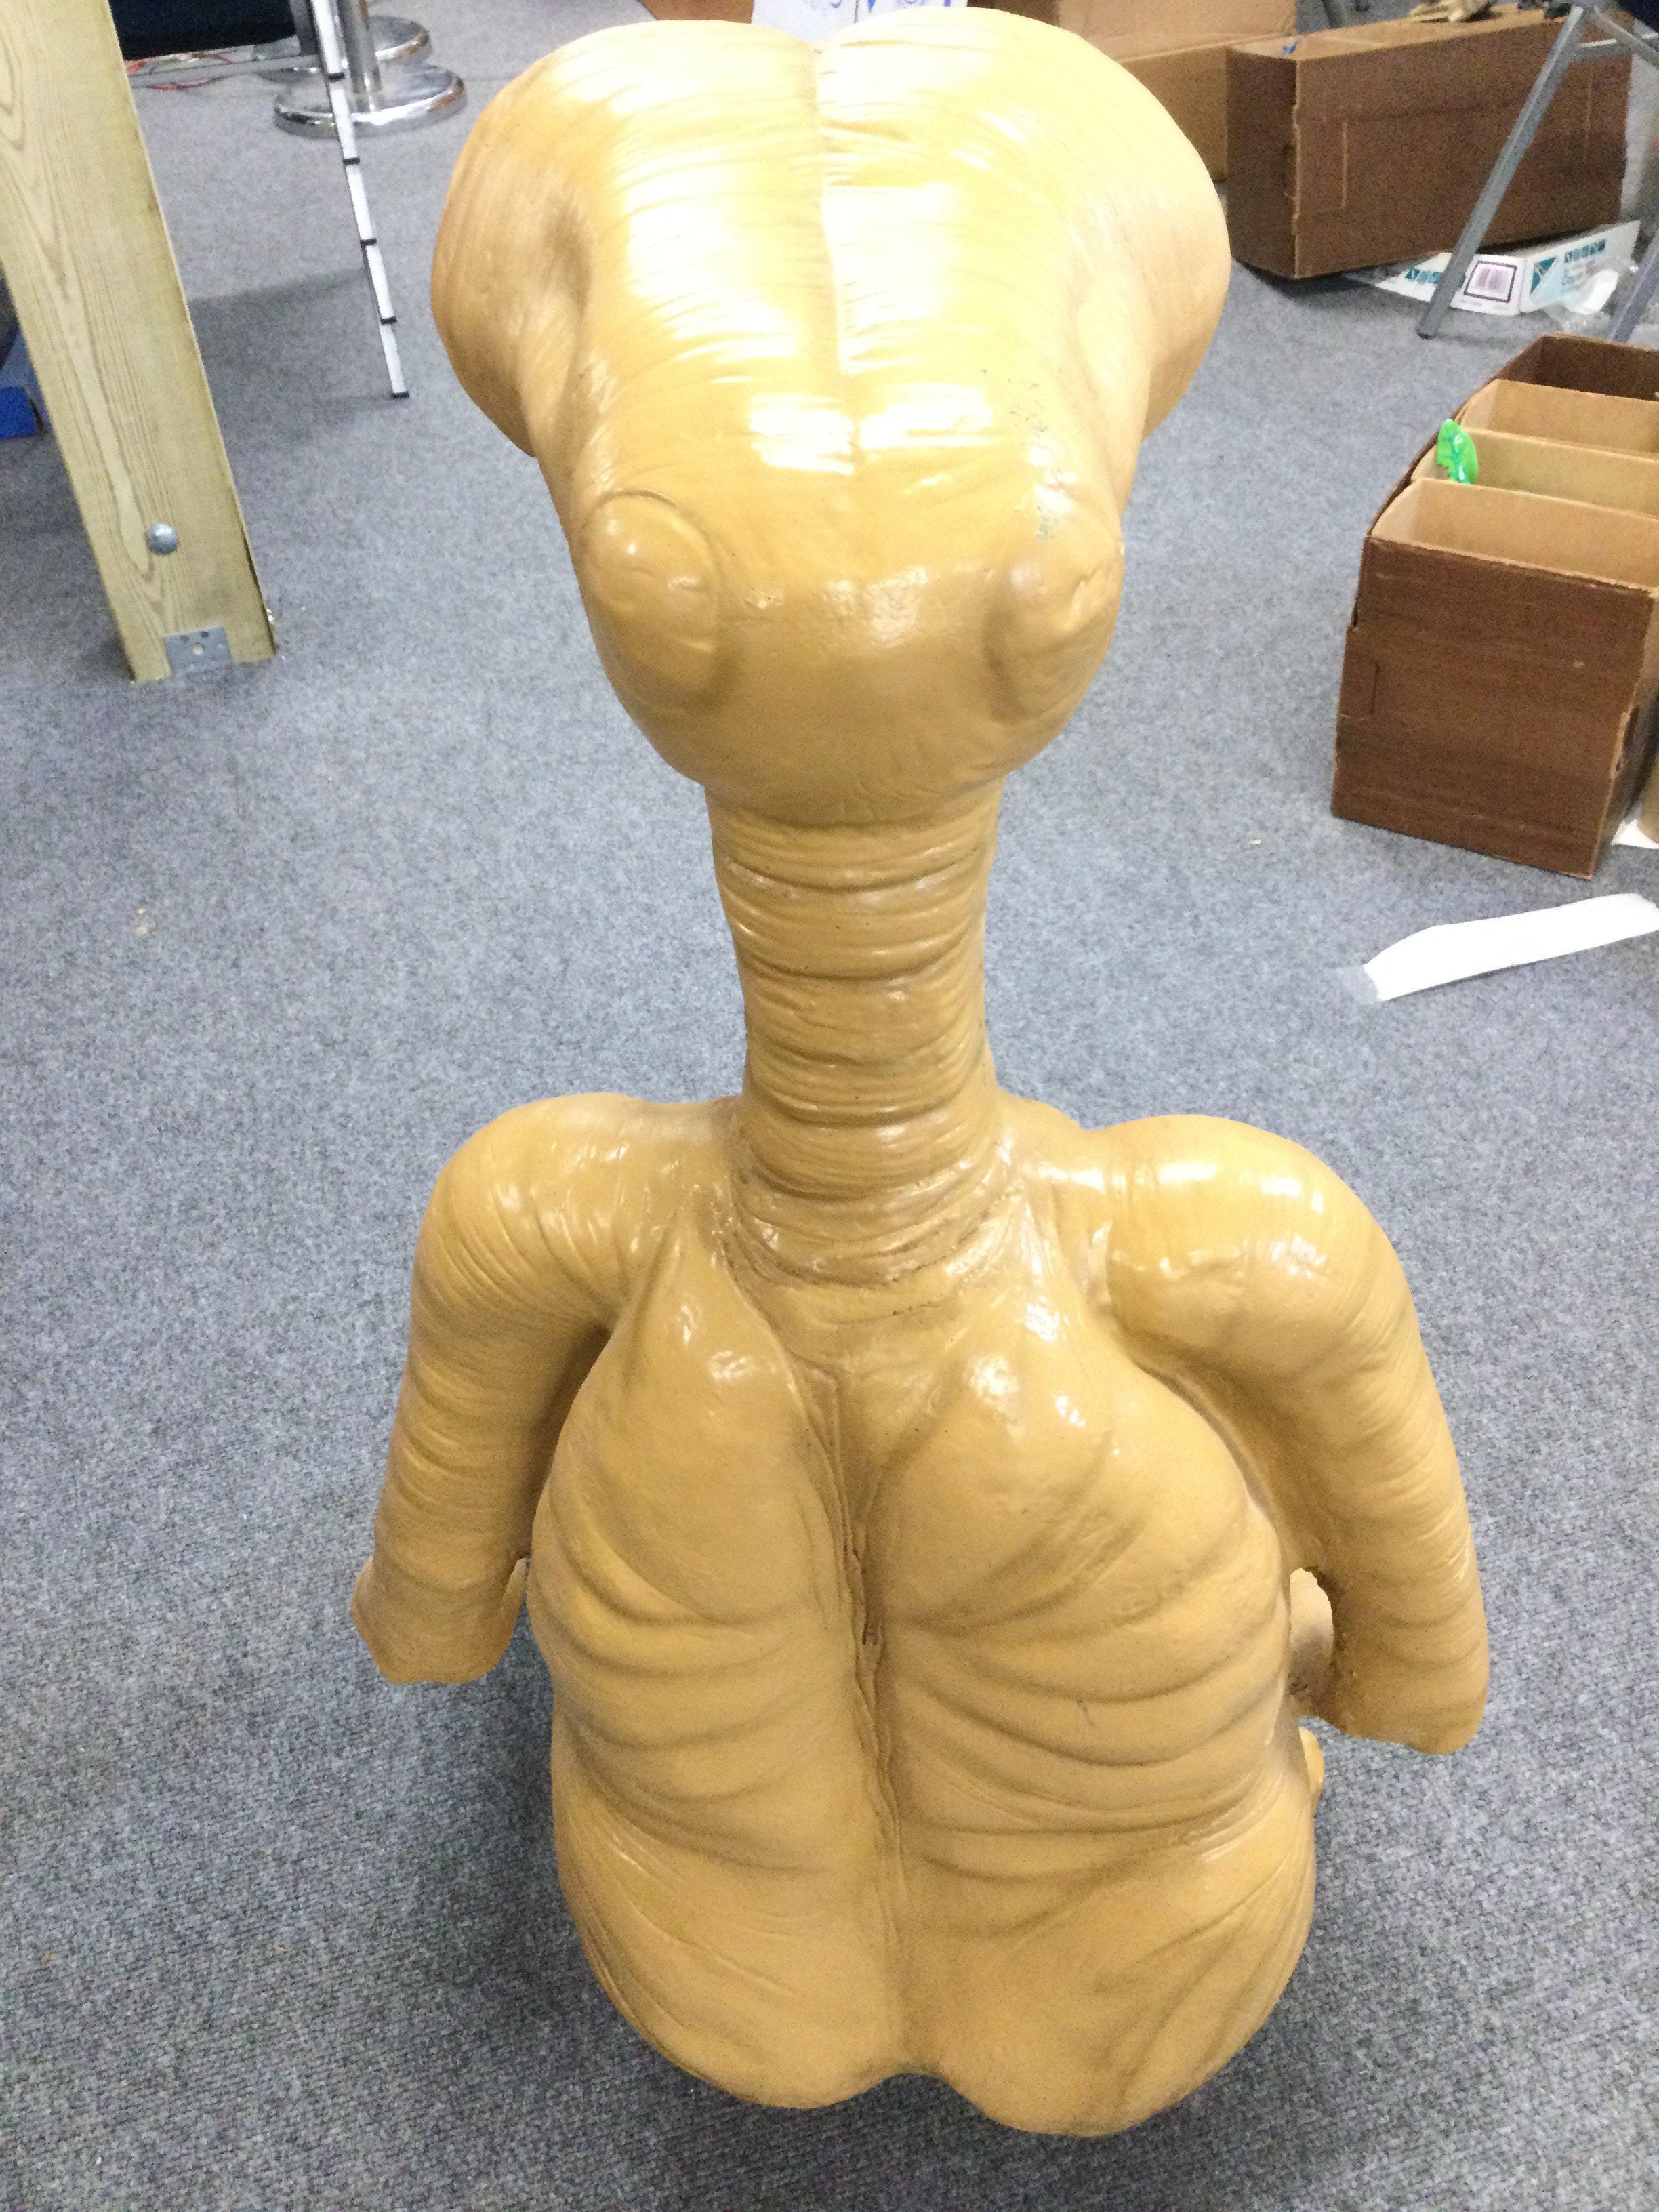 A Large Fibre Glass Figures of E.T. Possibly a Shop Display approx Height 87 Cm. - Image 2 of 2